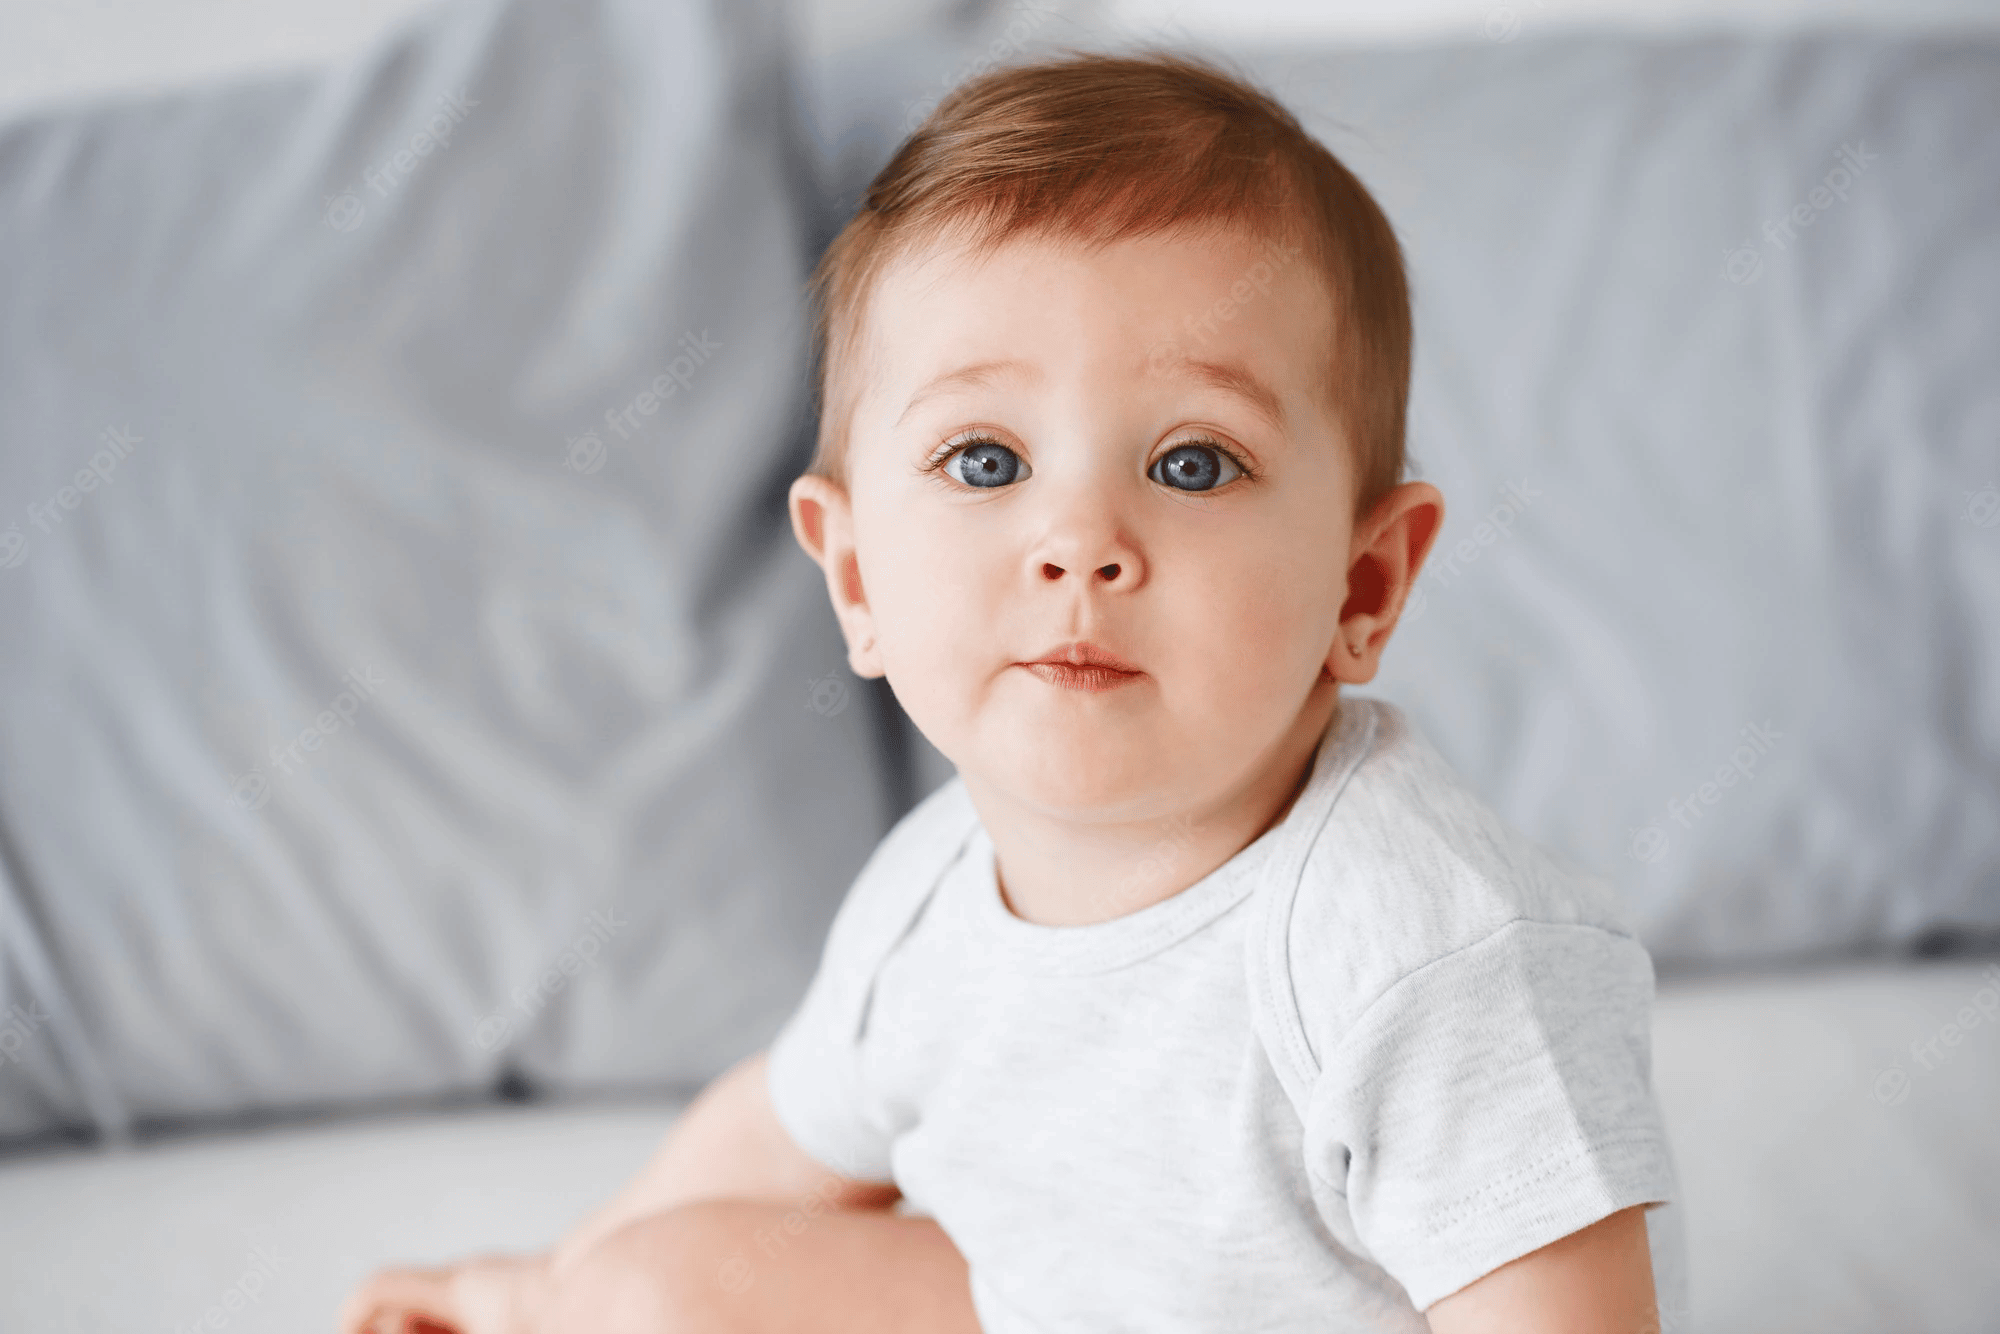 An image of a baby staring